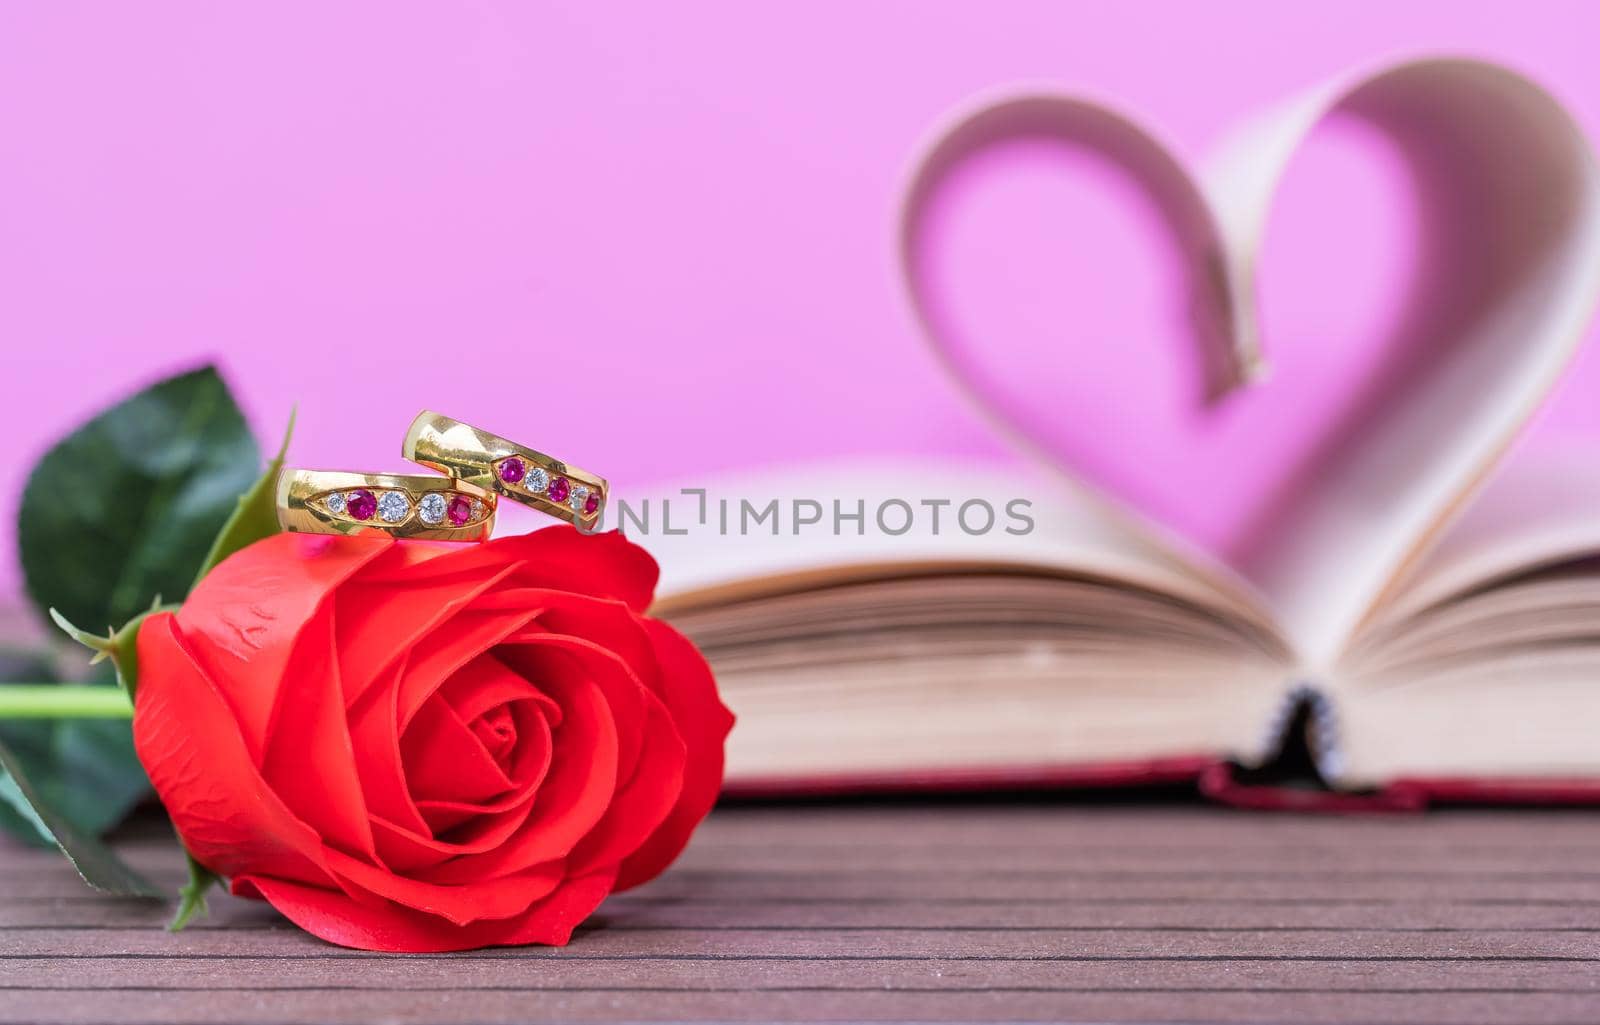 Pages of book curved into a heart shape and red rose. Love concept of heart shape from book pages on pink background